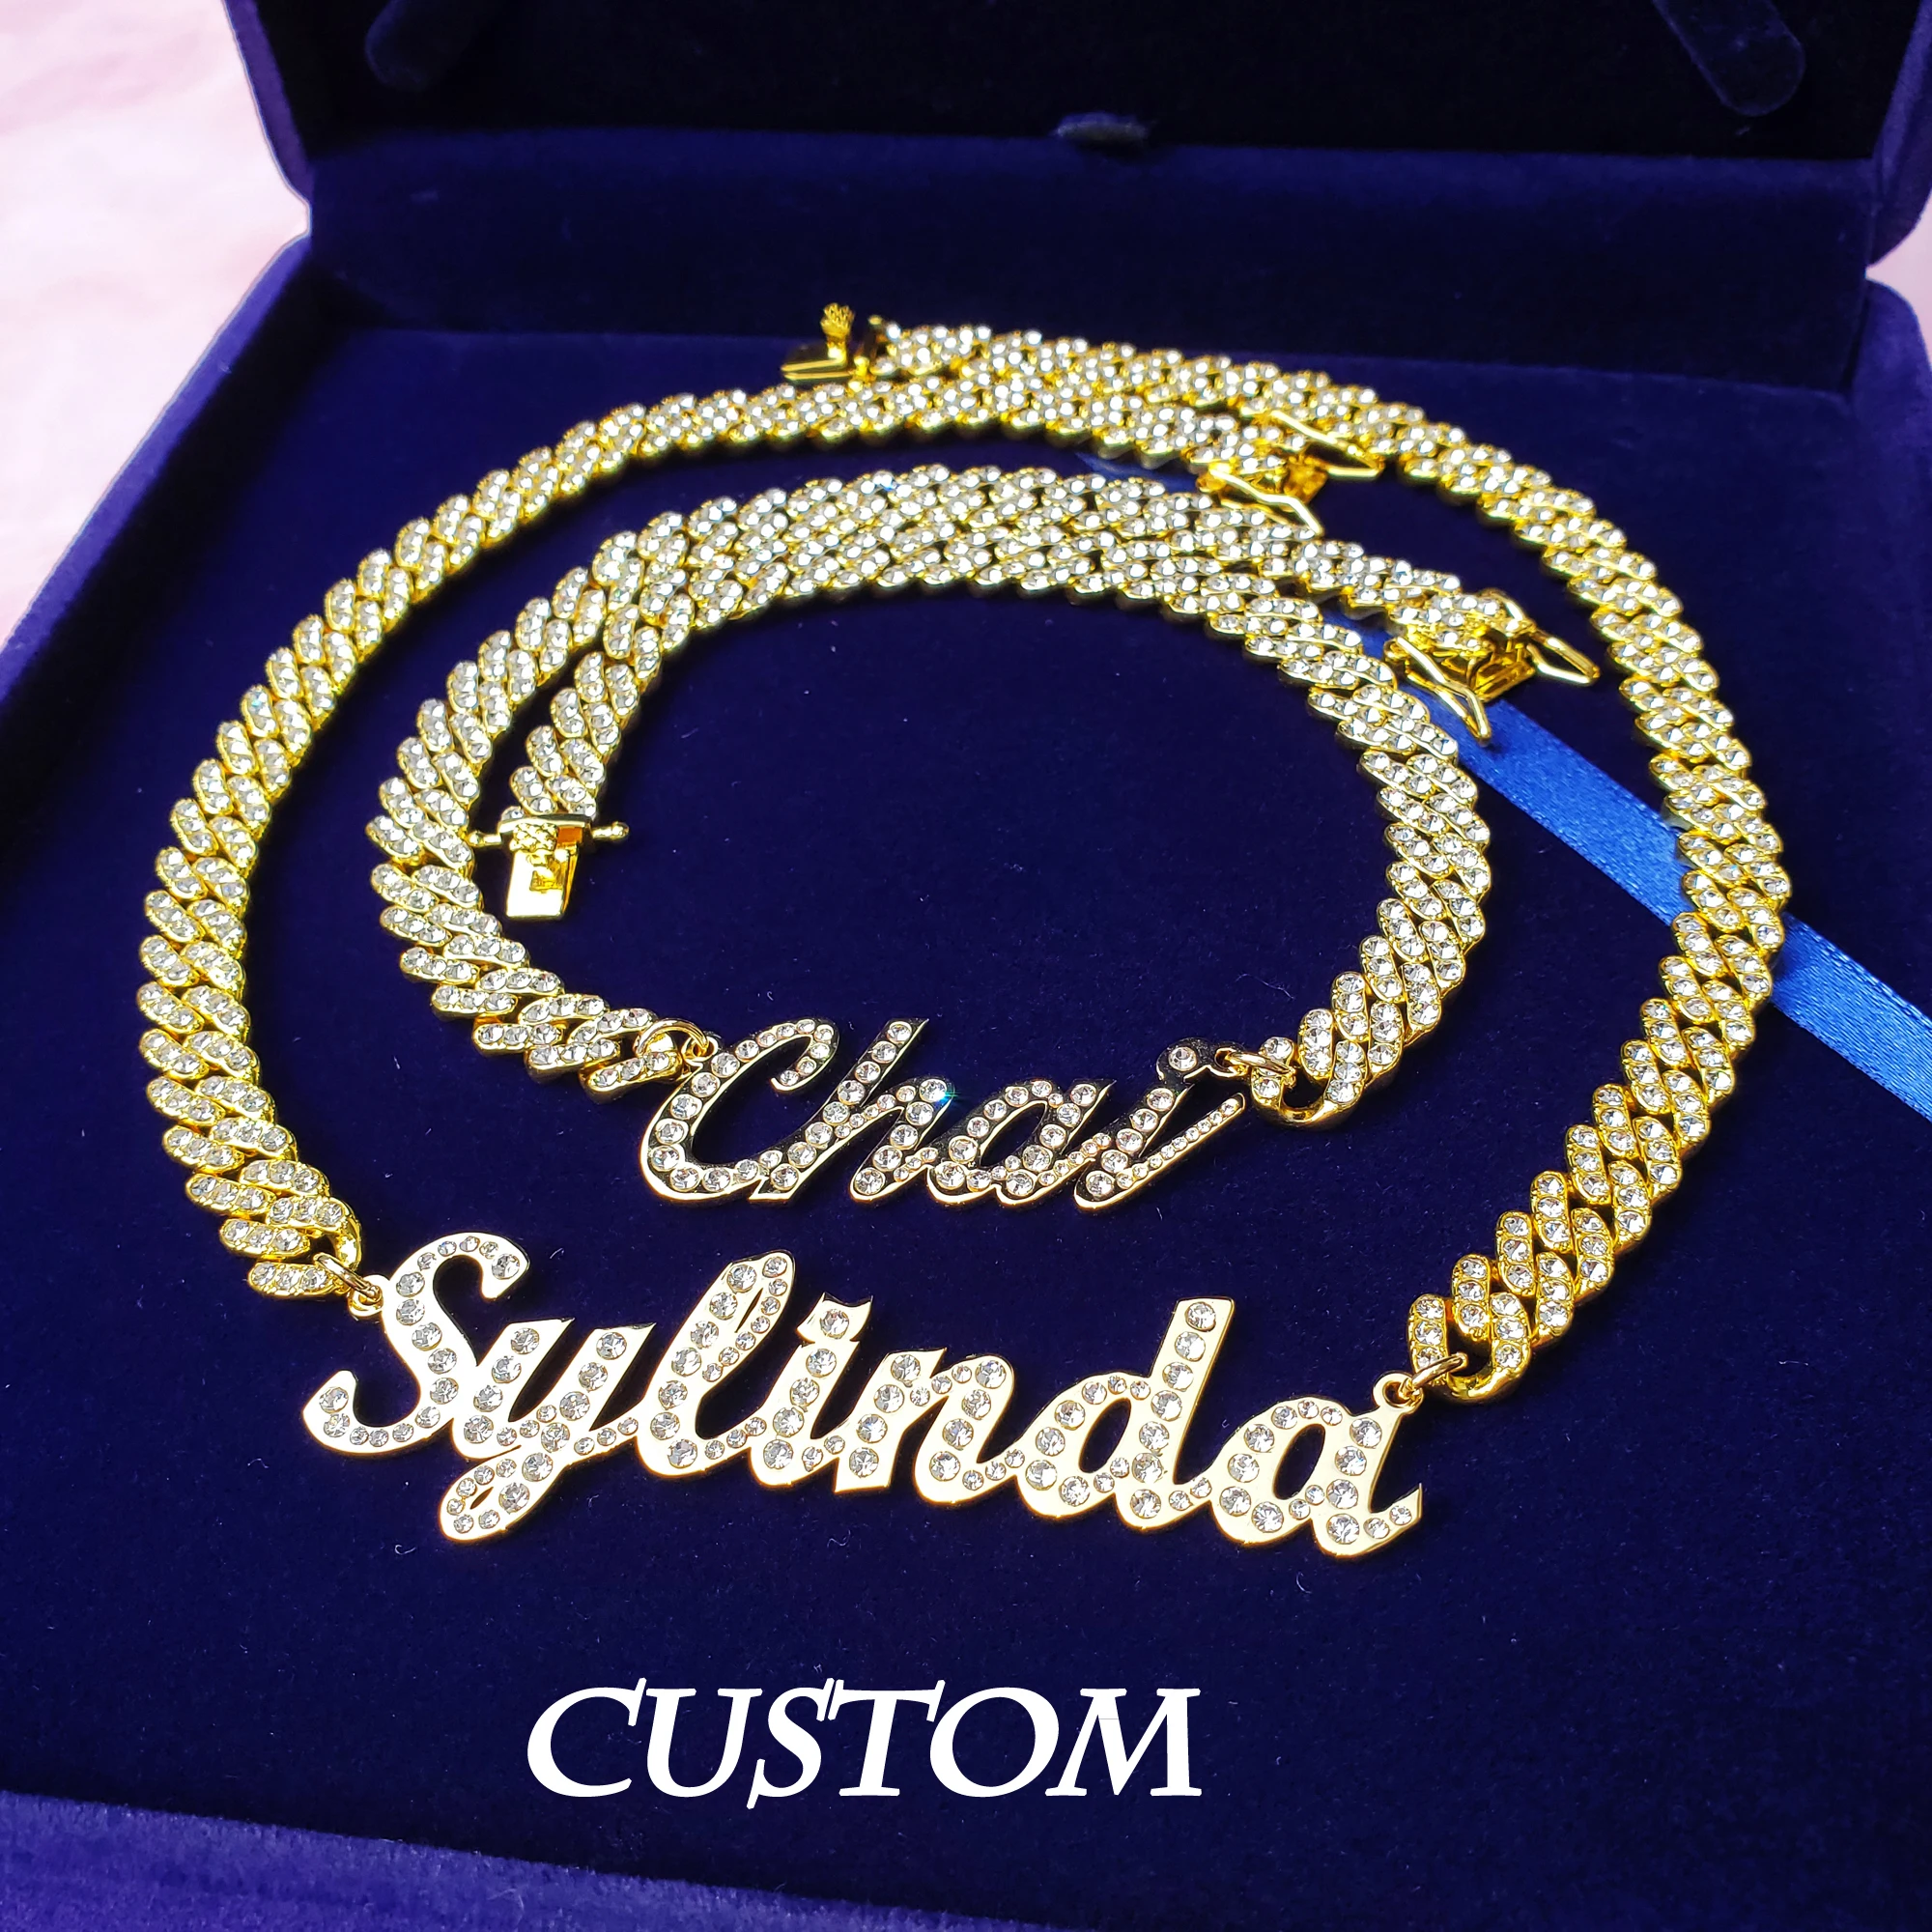 Personalized Name Necklace Stainless Steel with Rhinestone Cuban Chain Choker Necklace Perfect Gift for Her Part Prom Jewelry a z custom stainless steel bling bubble letters name necklace pendant rhinestone hip hop tennis chain necklaces jewelry gift